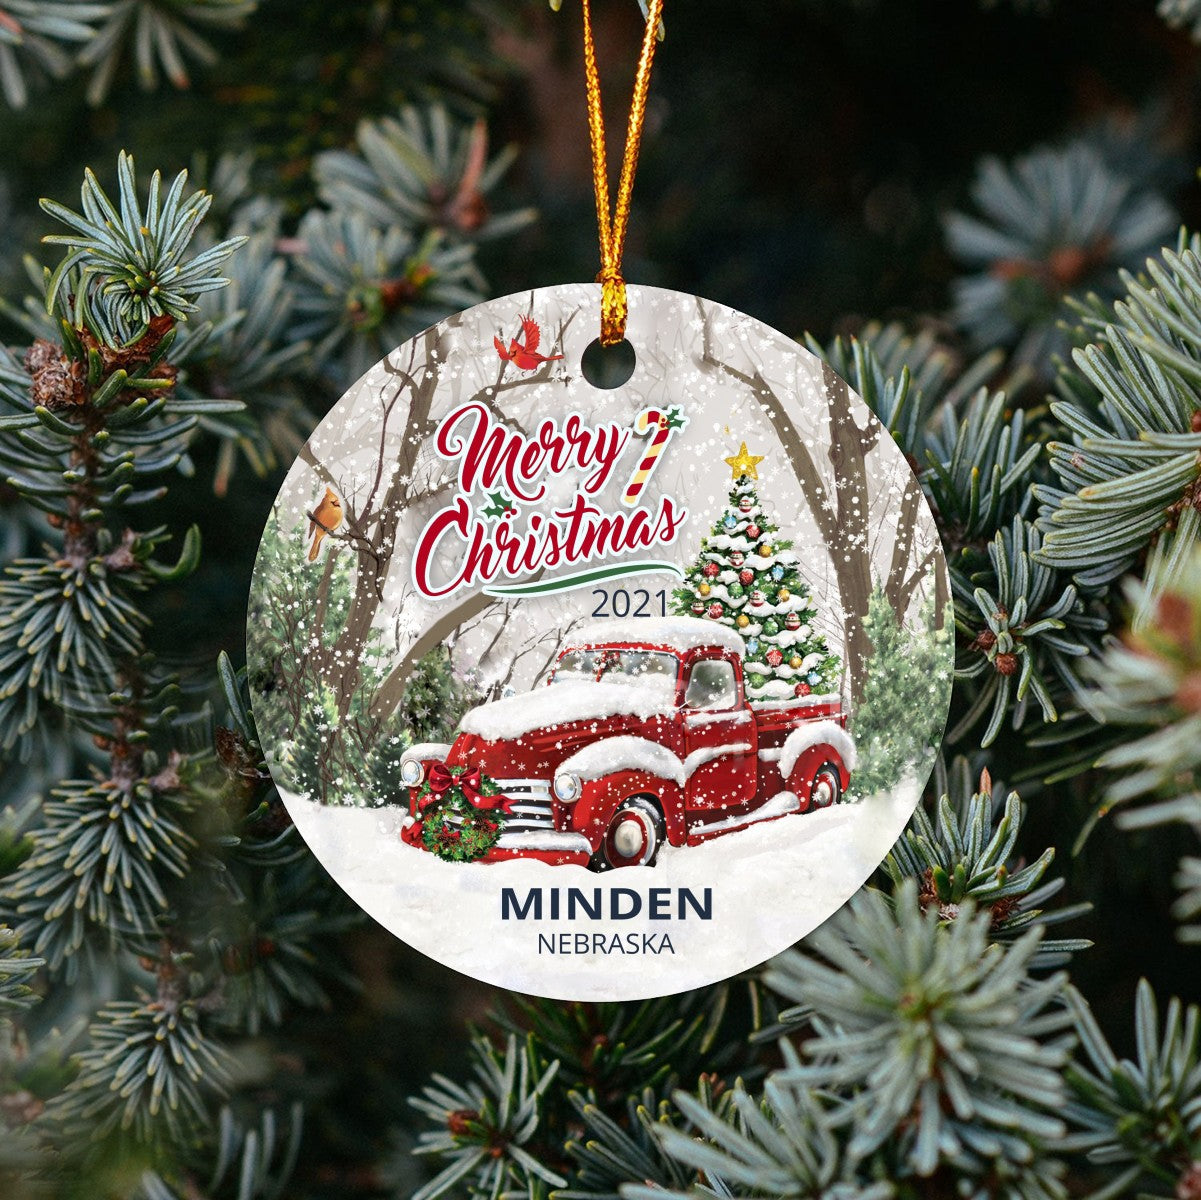 Christmas Tree Ornaments Minden - Ornament With Name City, State Minden Nebraska NE Ornament - Red Truck Xmas Ornaments 3'' Plastic Gift For Family, Friend And Housewarming